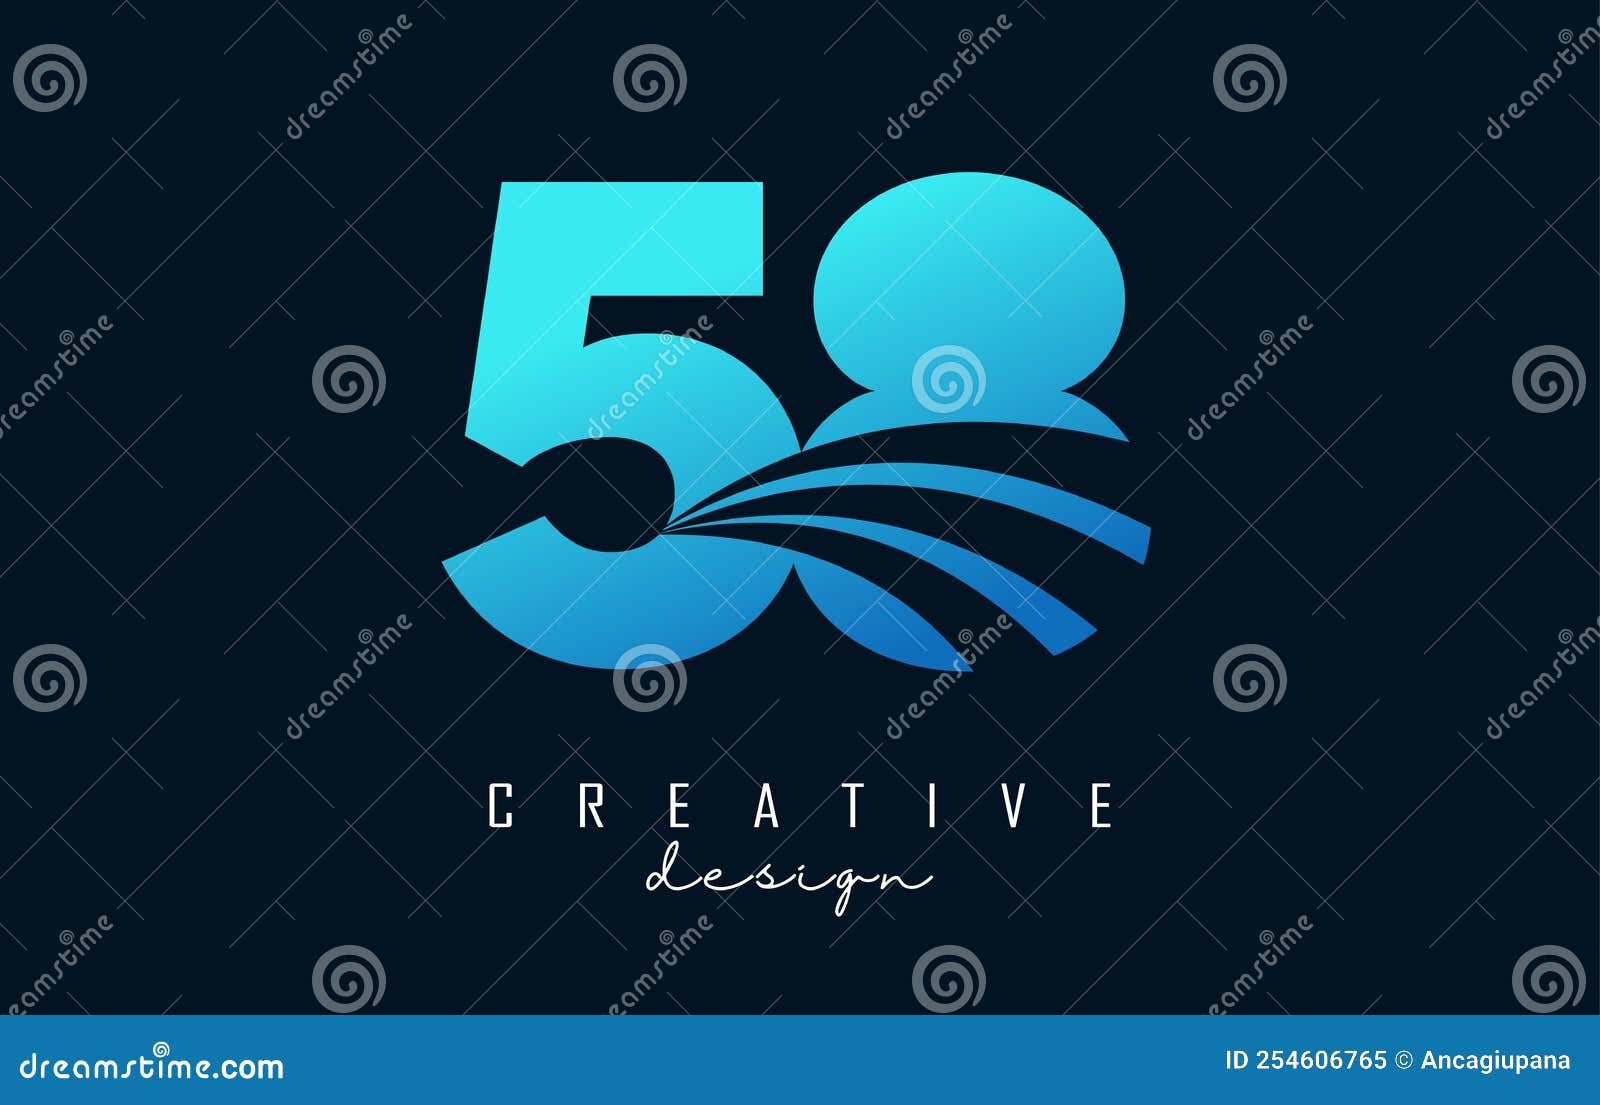 Creative Number 58 5 8 Logo With Leading Lines And Road Concept Design